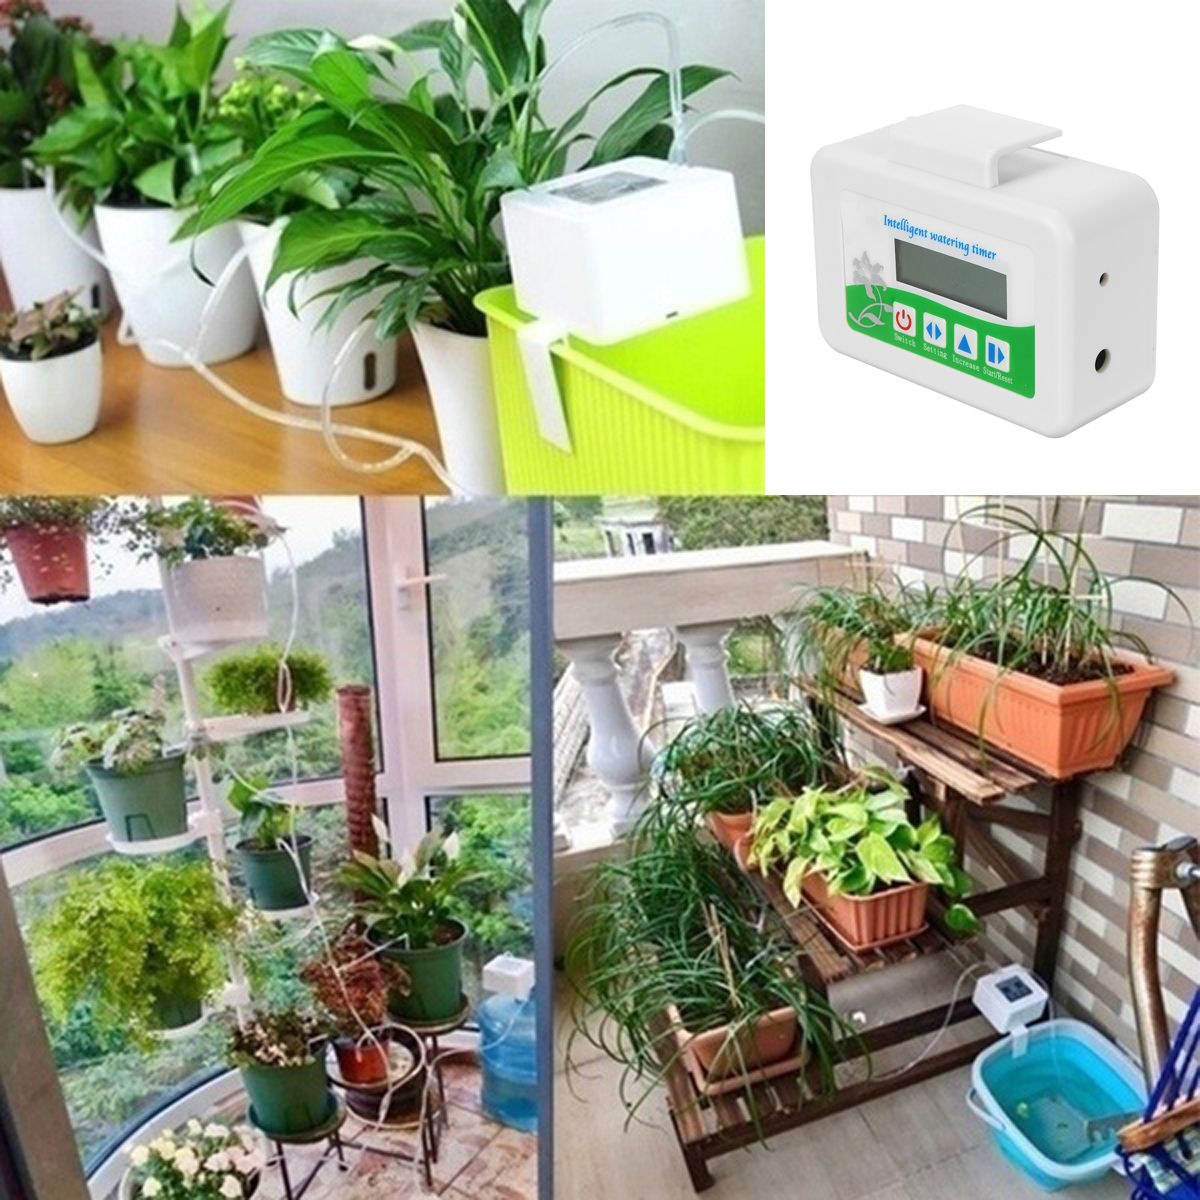 Intelligent-Watering-Timer-Automatic-Solar-Water-Controlle-Irrigation-System-Kit-1711287